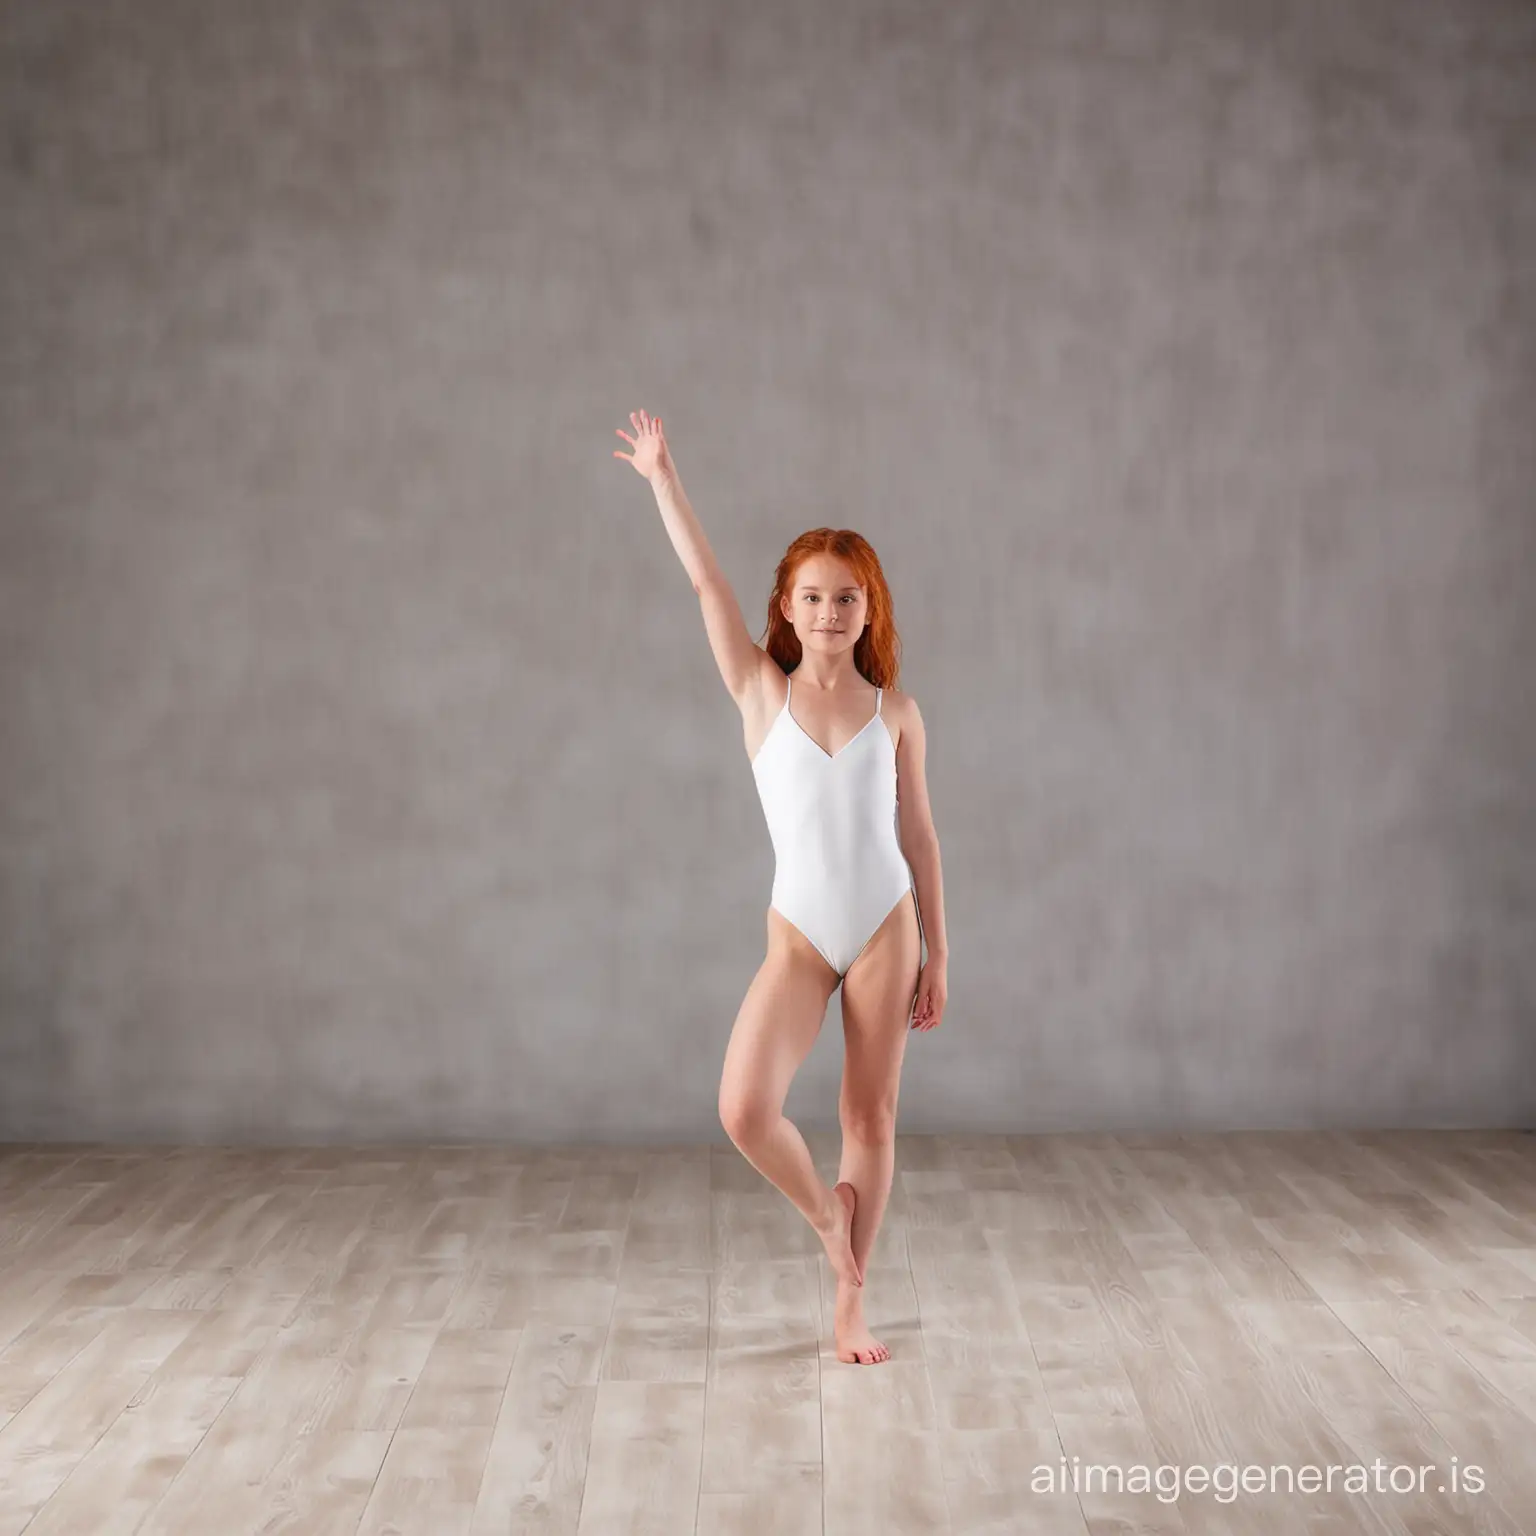 Redheaded-Gymnast-in-White-Leotard-Performing-Floor-Exercise